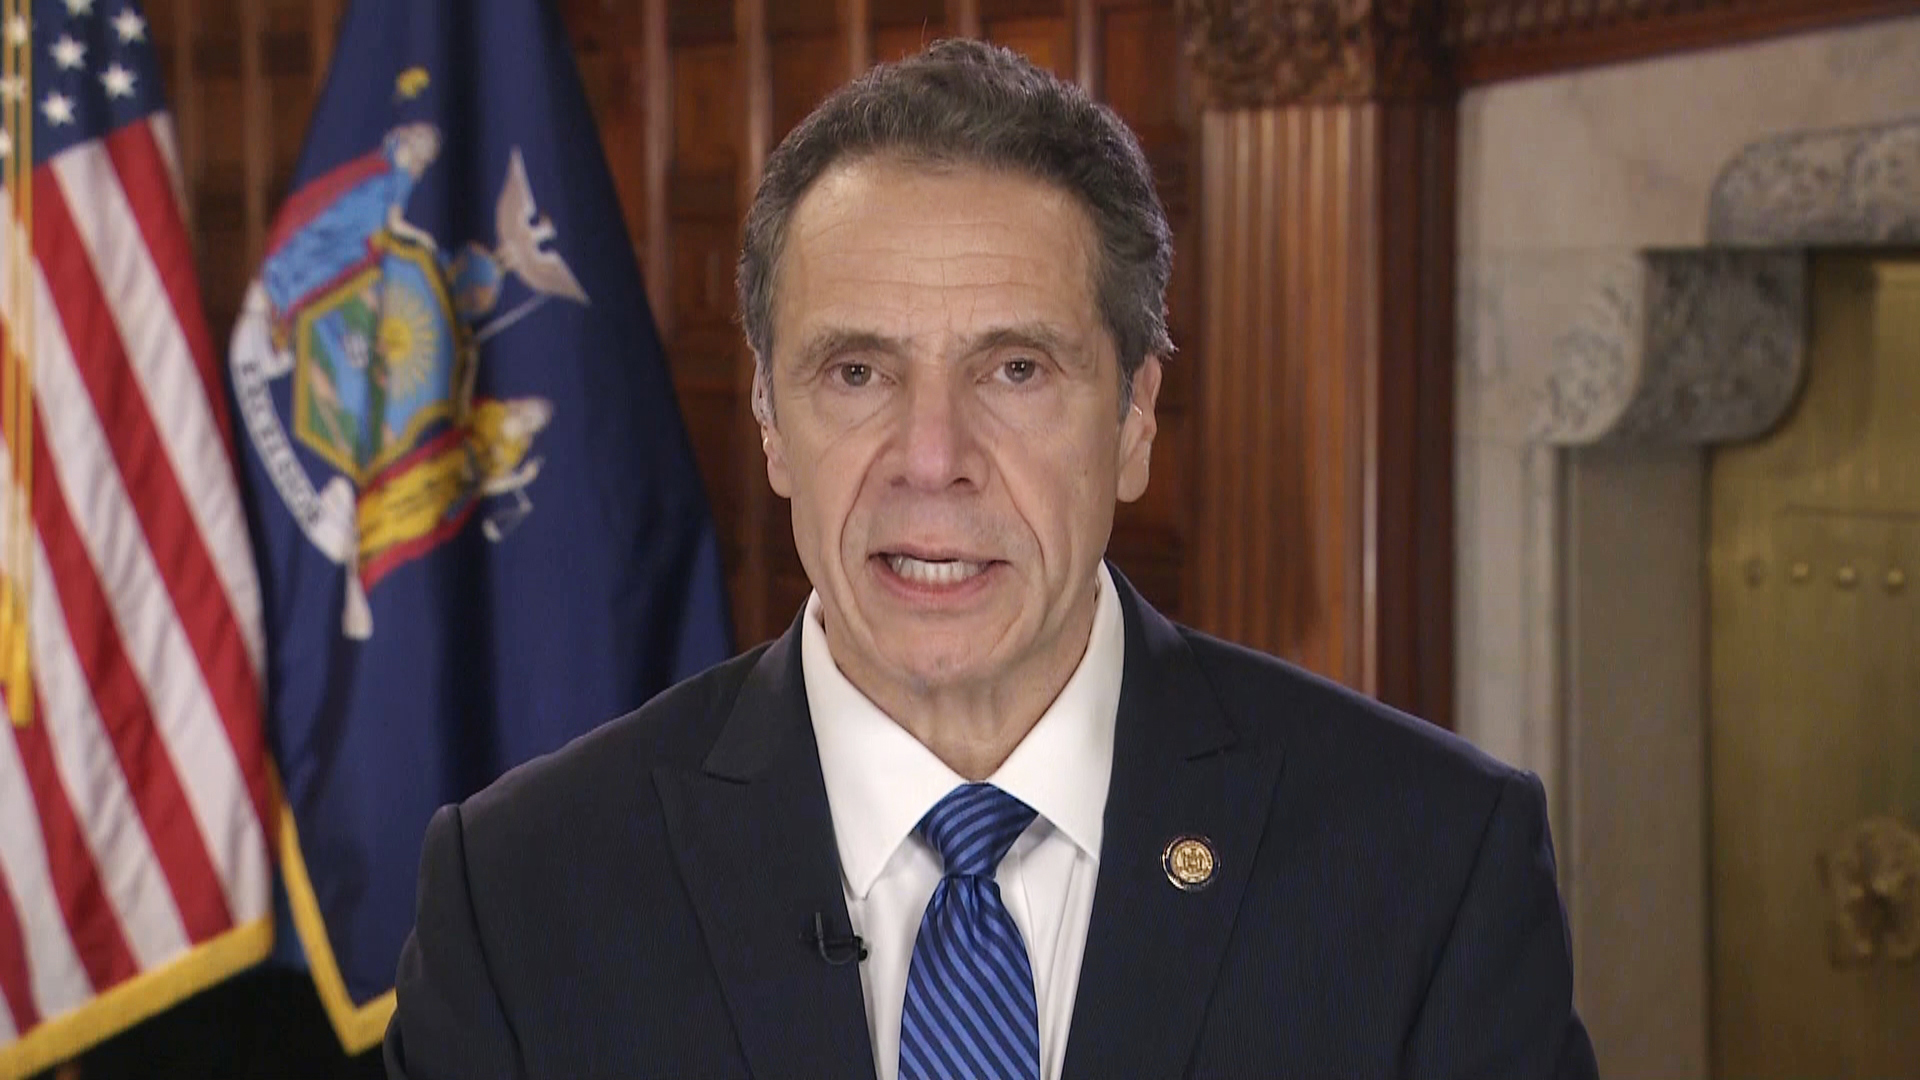 Former New York Governor Cuomo Charged With Sex Crime